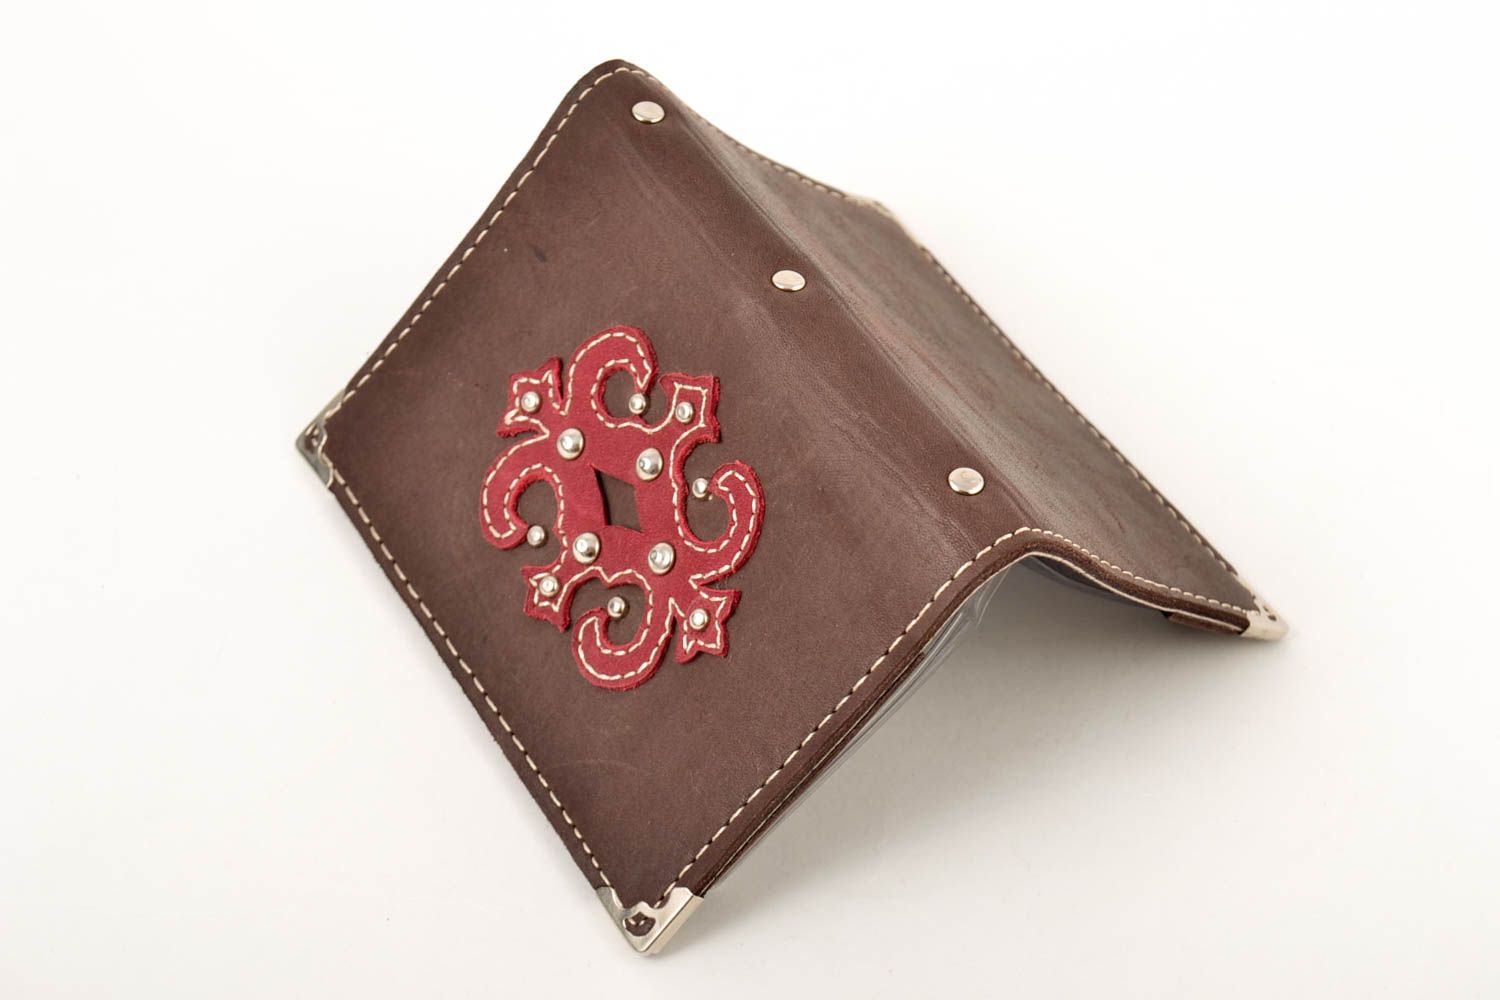 Driving license holder handmade leather goods leather accessories gifts for men photo 5